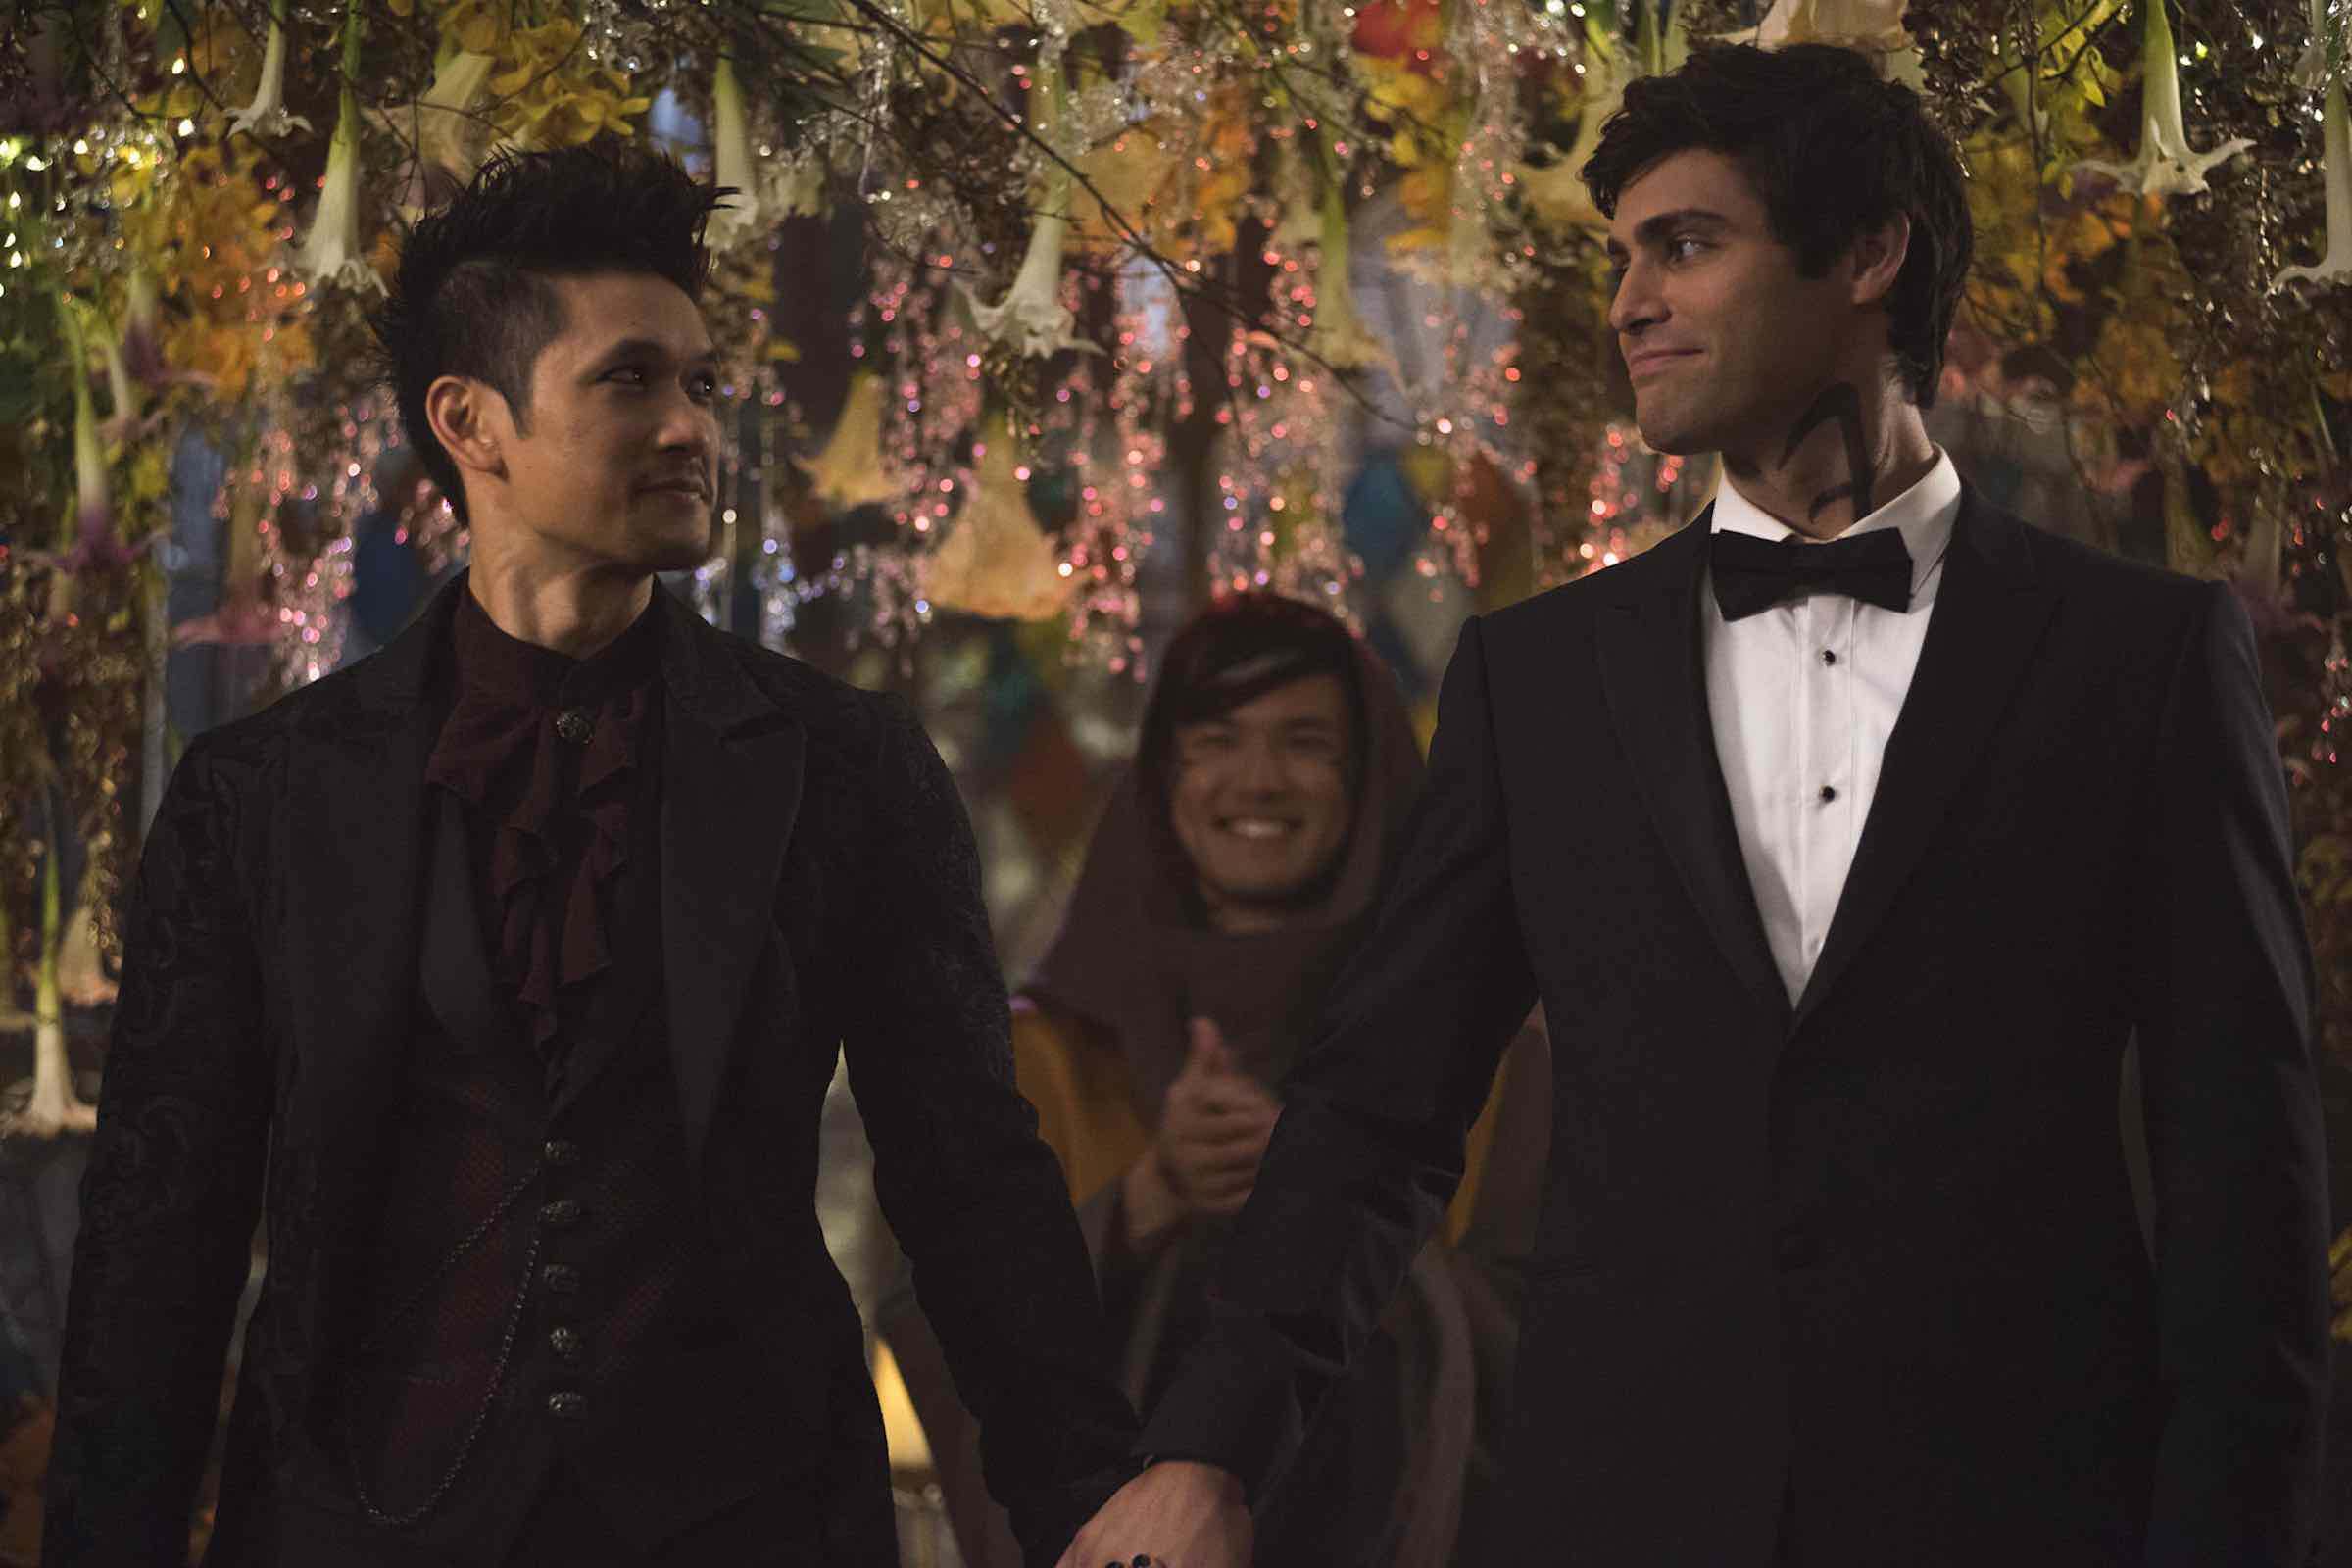 Been following the growth of the story of Alec (Matthew Daddario) & Magnus (Harry Shum Jr.) in 'Shadowhunters'? Test your knowledge with our Malec quiz.